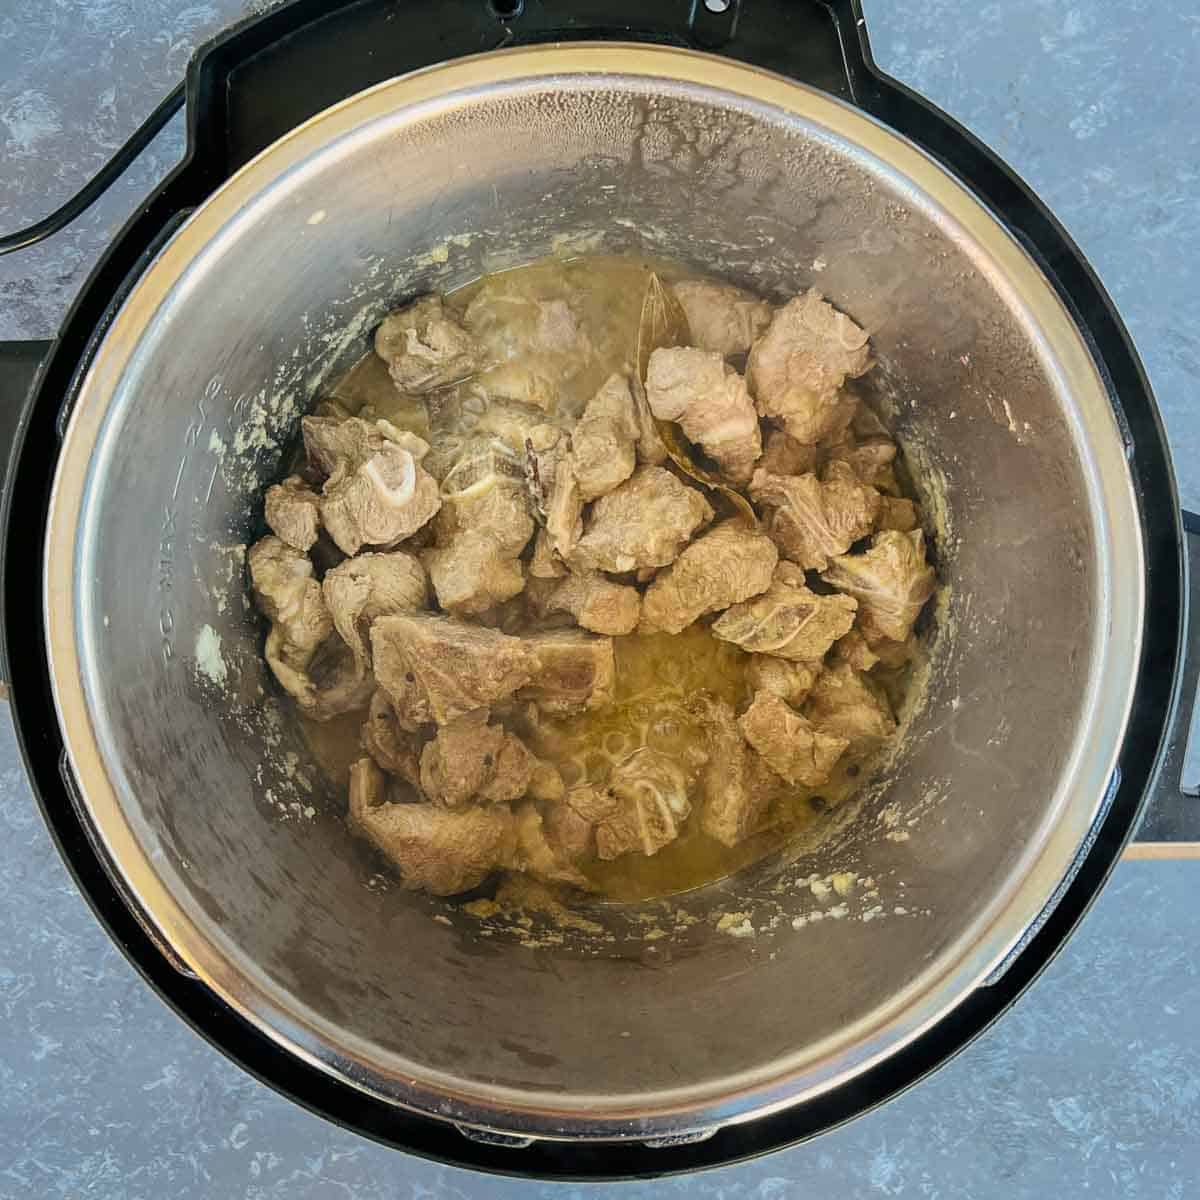 Cooked onion paste along with lamb in the Instant Pot.